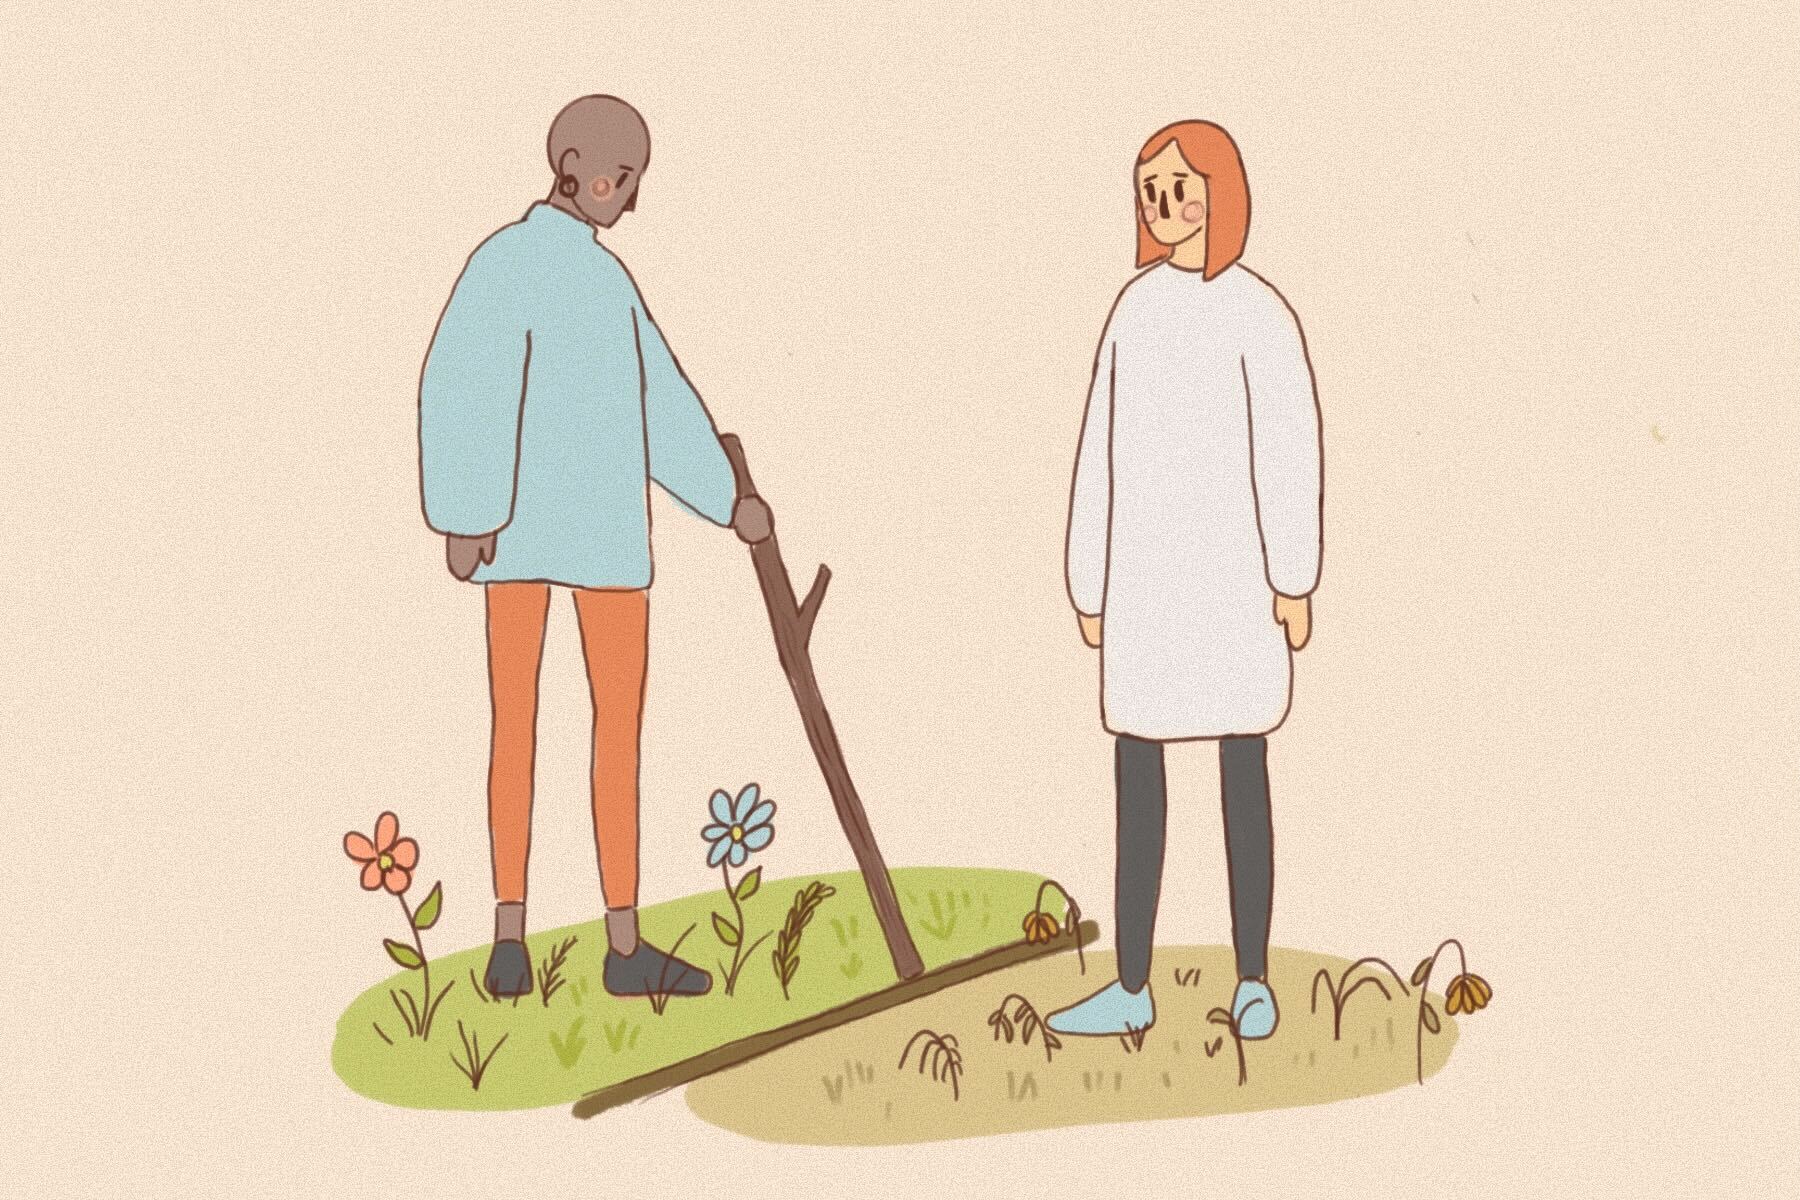 In article about boundaries, illustration of a person setting down a stick as a barrier.